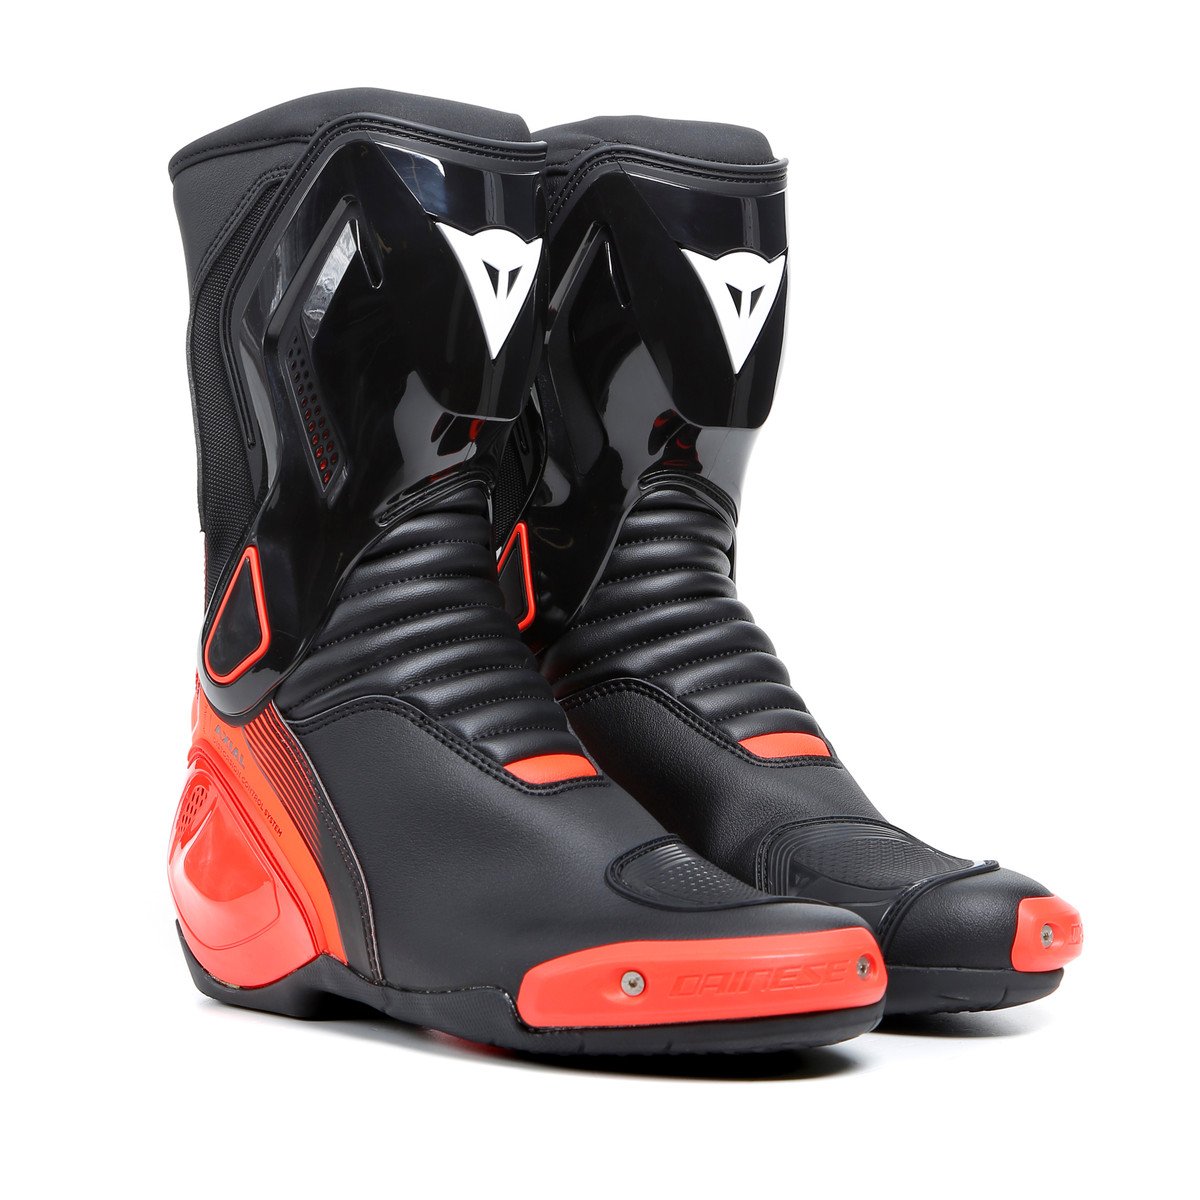 Image of Dainese Nexus 2 Boots Black Fluo Red Size 41 ID 8051019292766